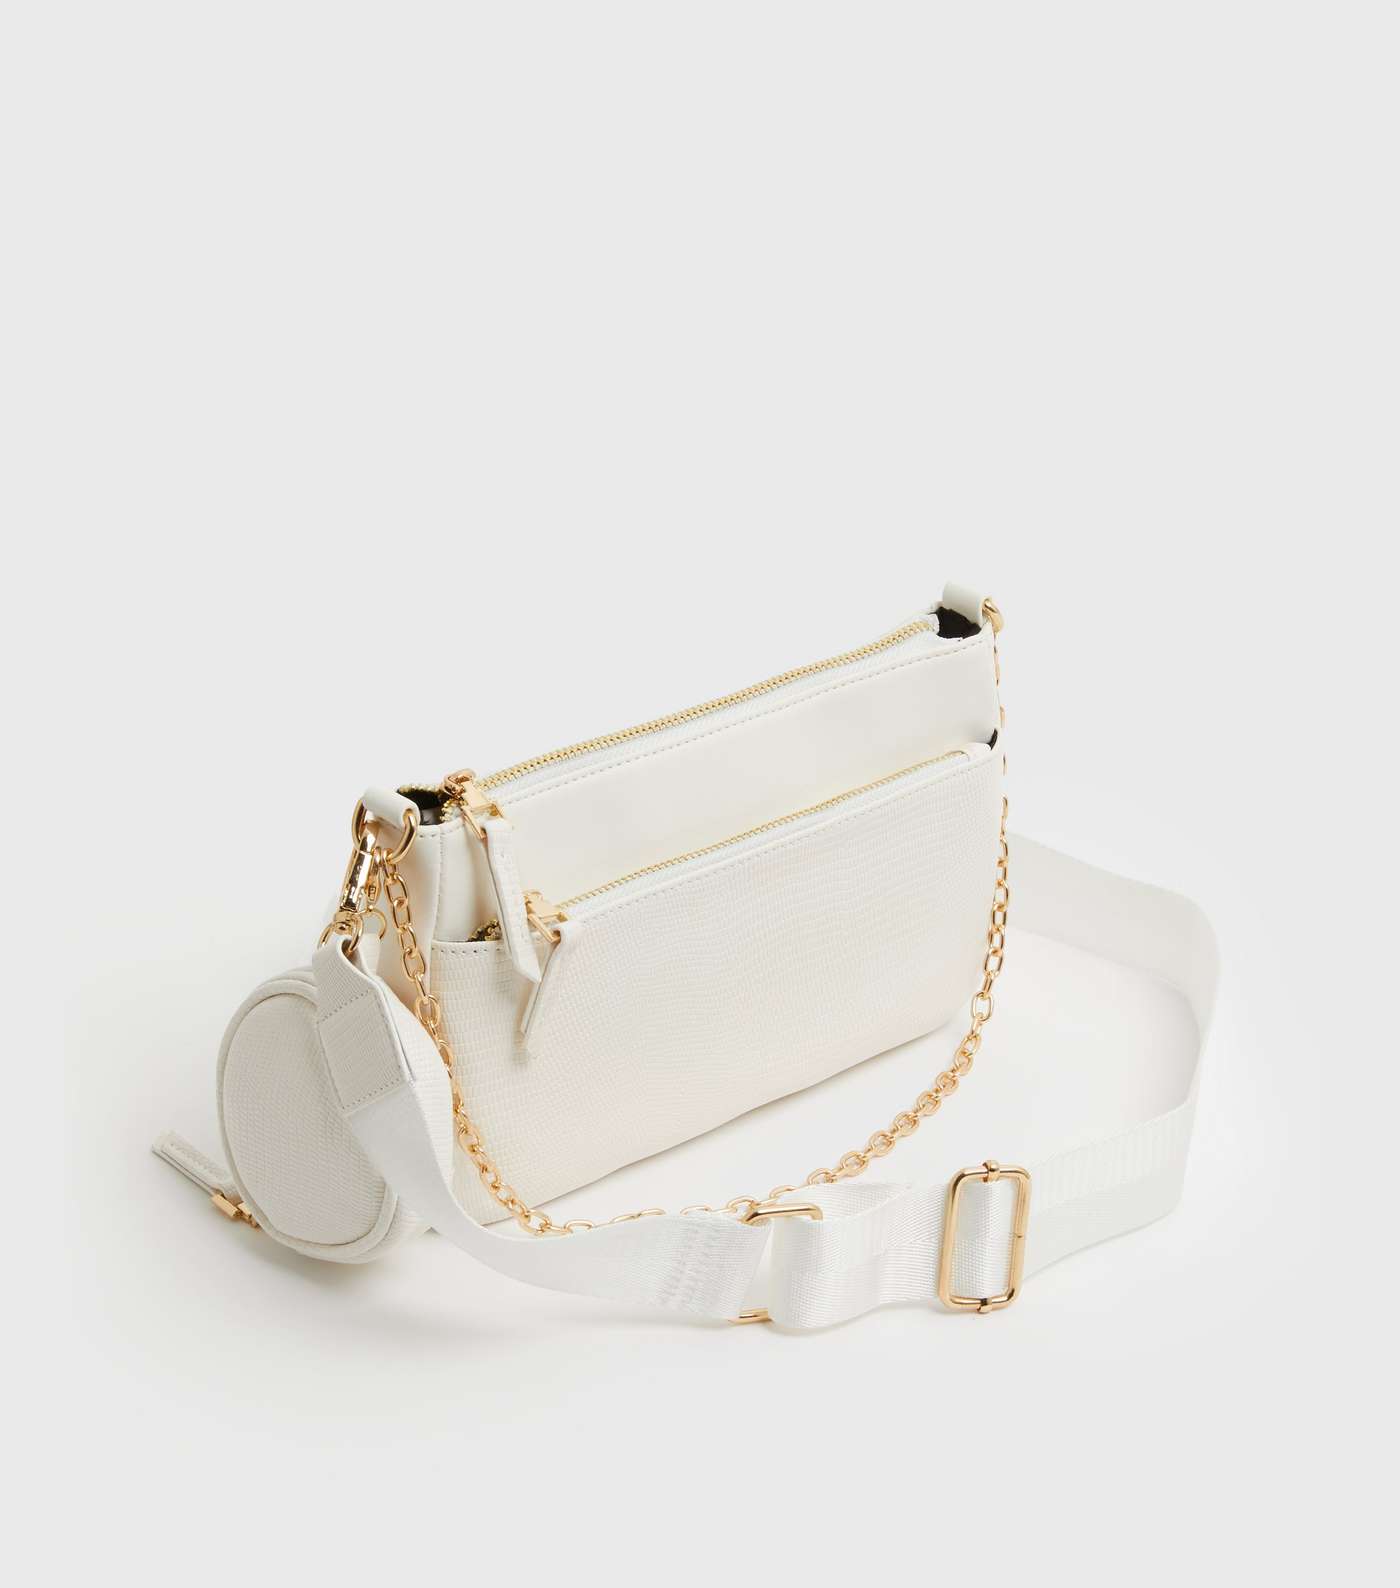 Cream Leather-Look Faux Snake Chain Cross Body Bag Image 3